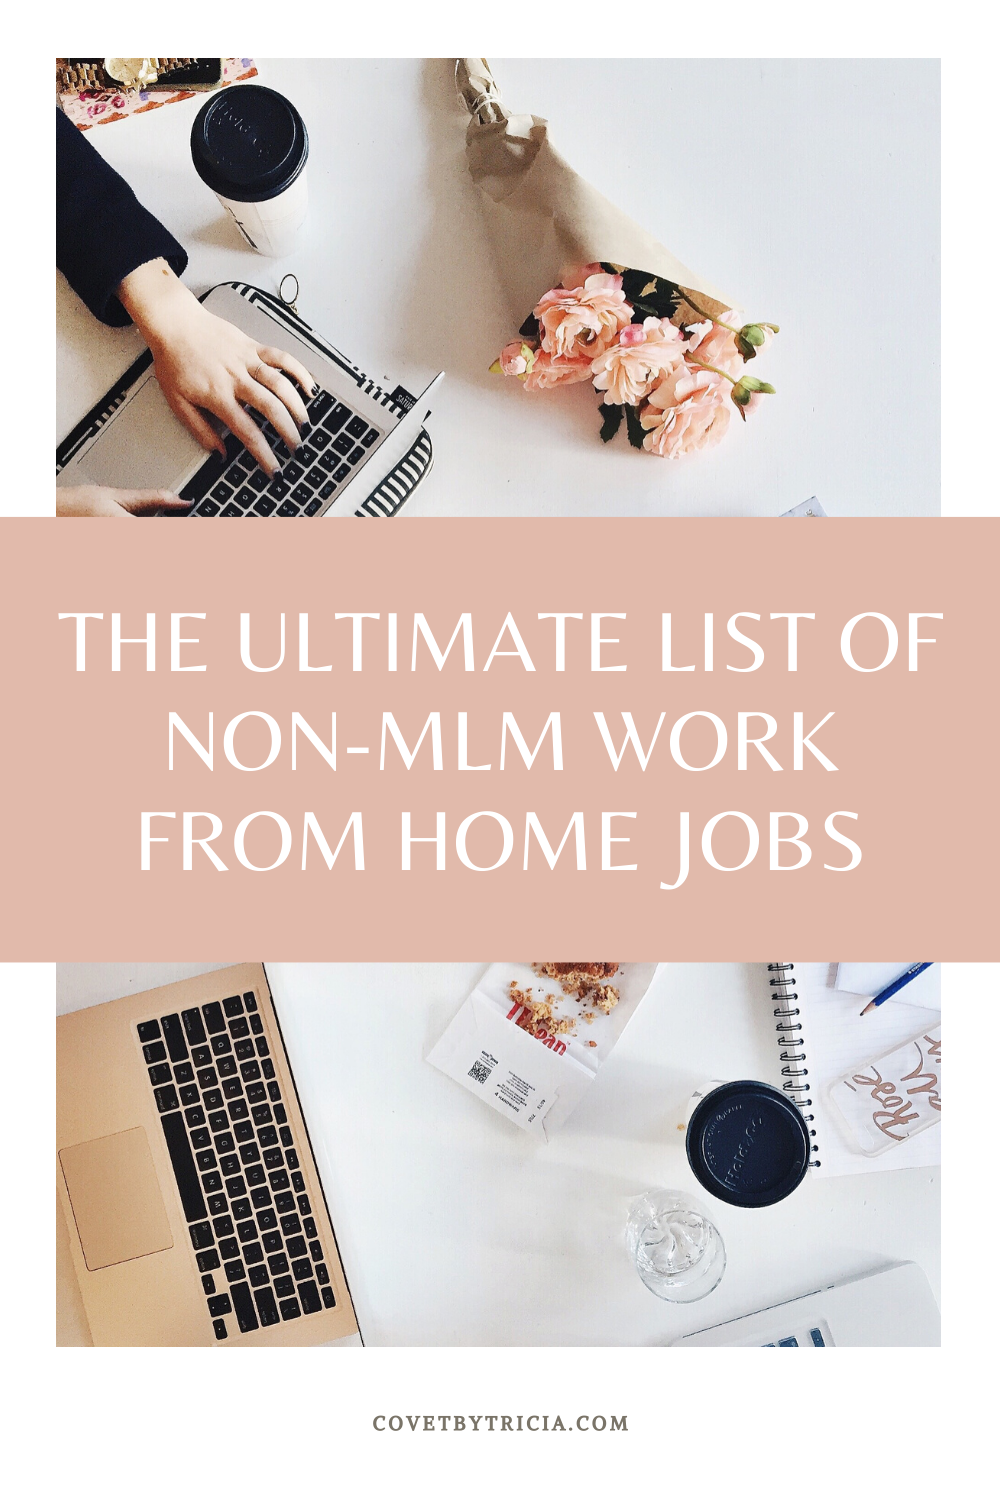 The Ultimate List of Non-MLM Work from Home Jobs: Whether you want to start your own business or find a work-from-home job with an established company, there's an opportunity for practically everyone to work from home on this list! Here's the Ultimate List of Work From Home Jobs that are Not MLM. #wfh #wahm #sahm 